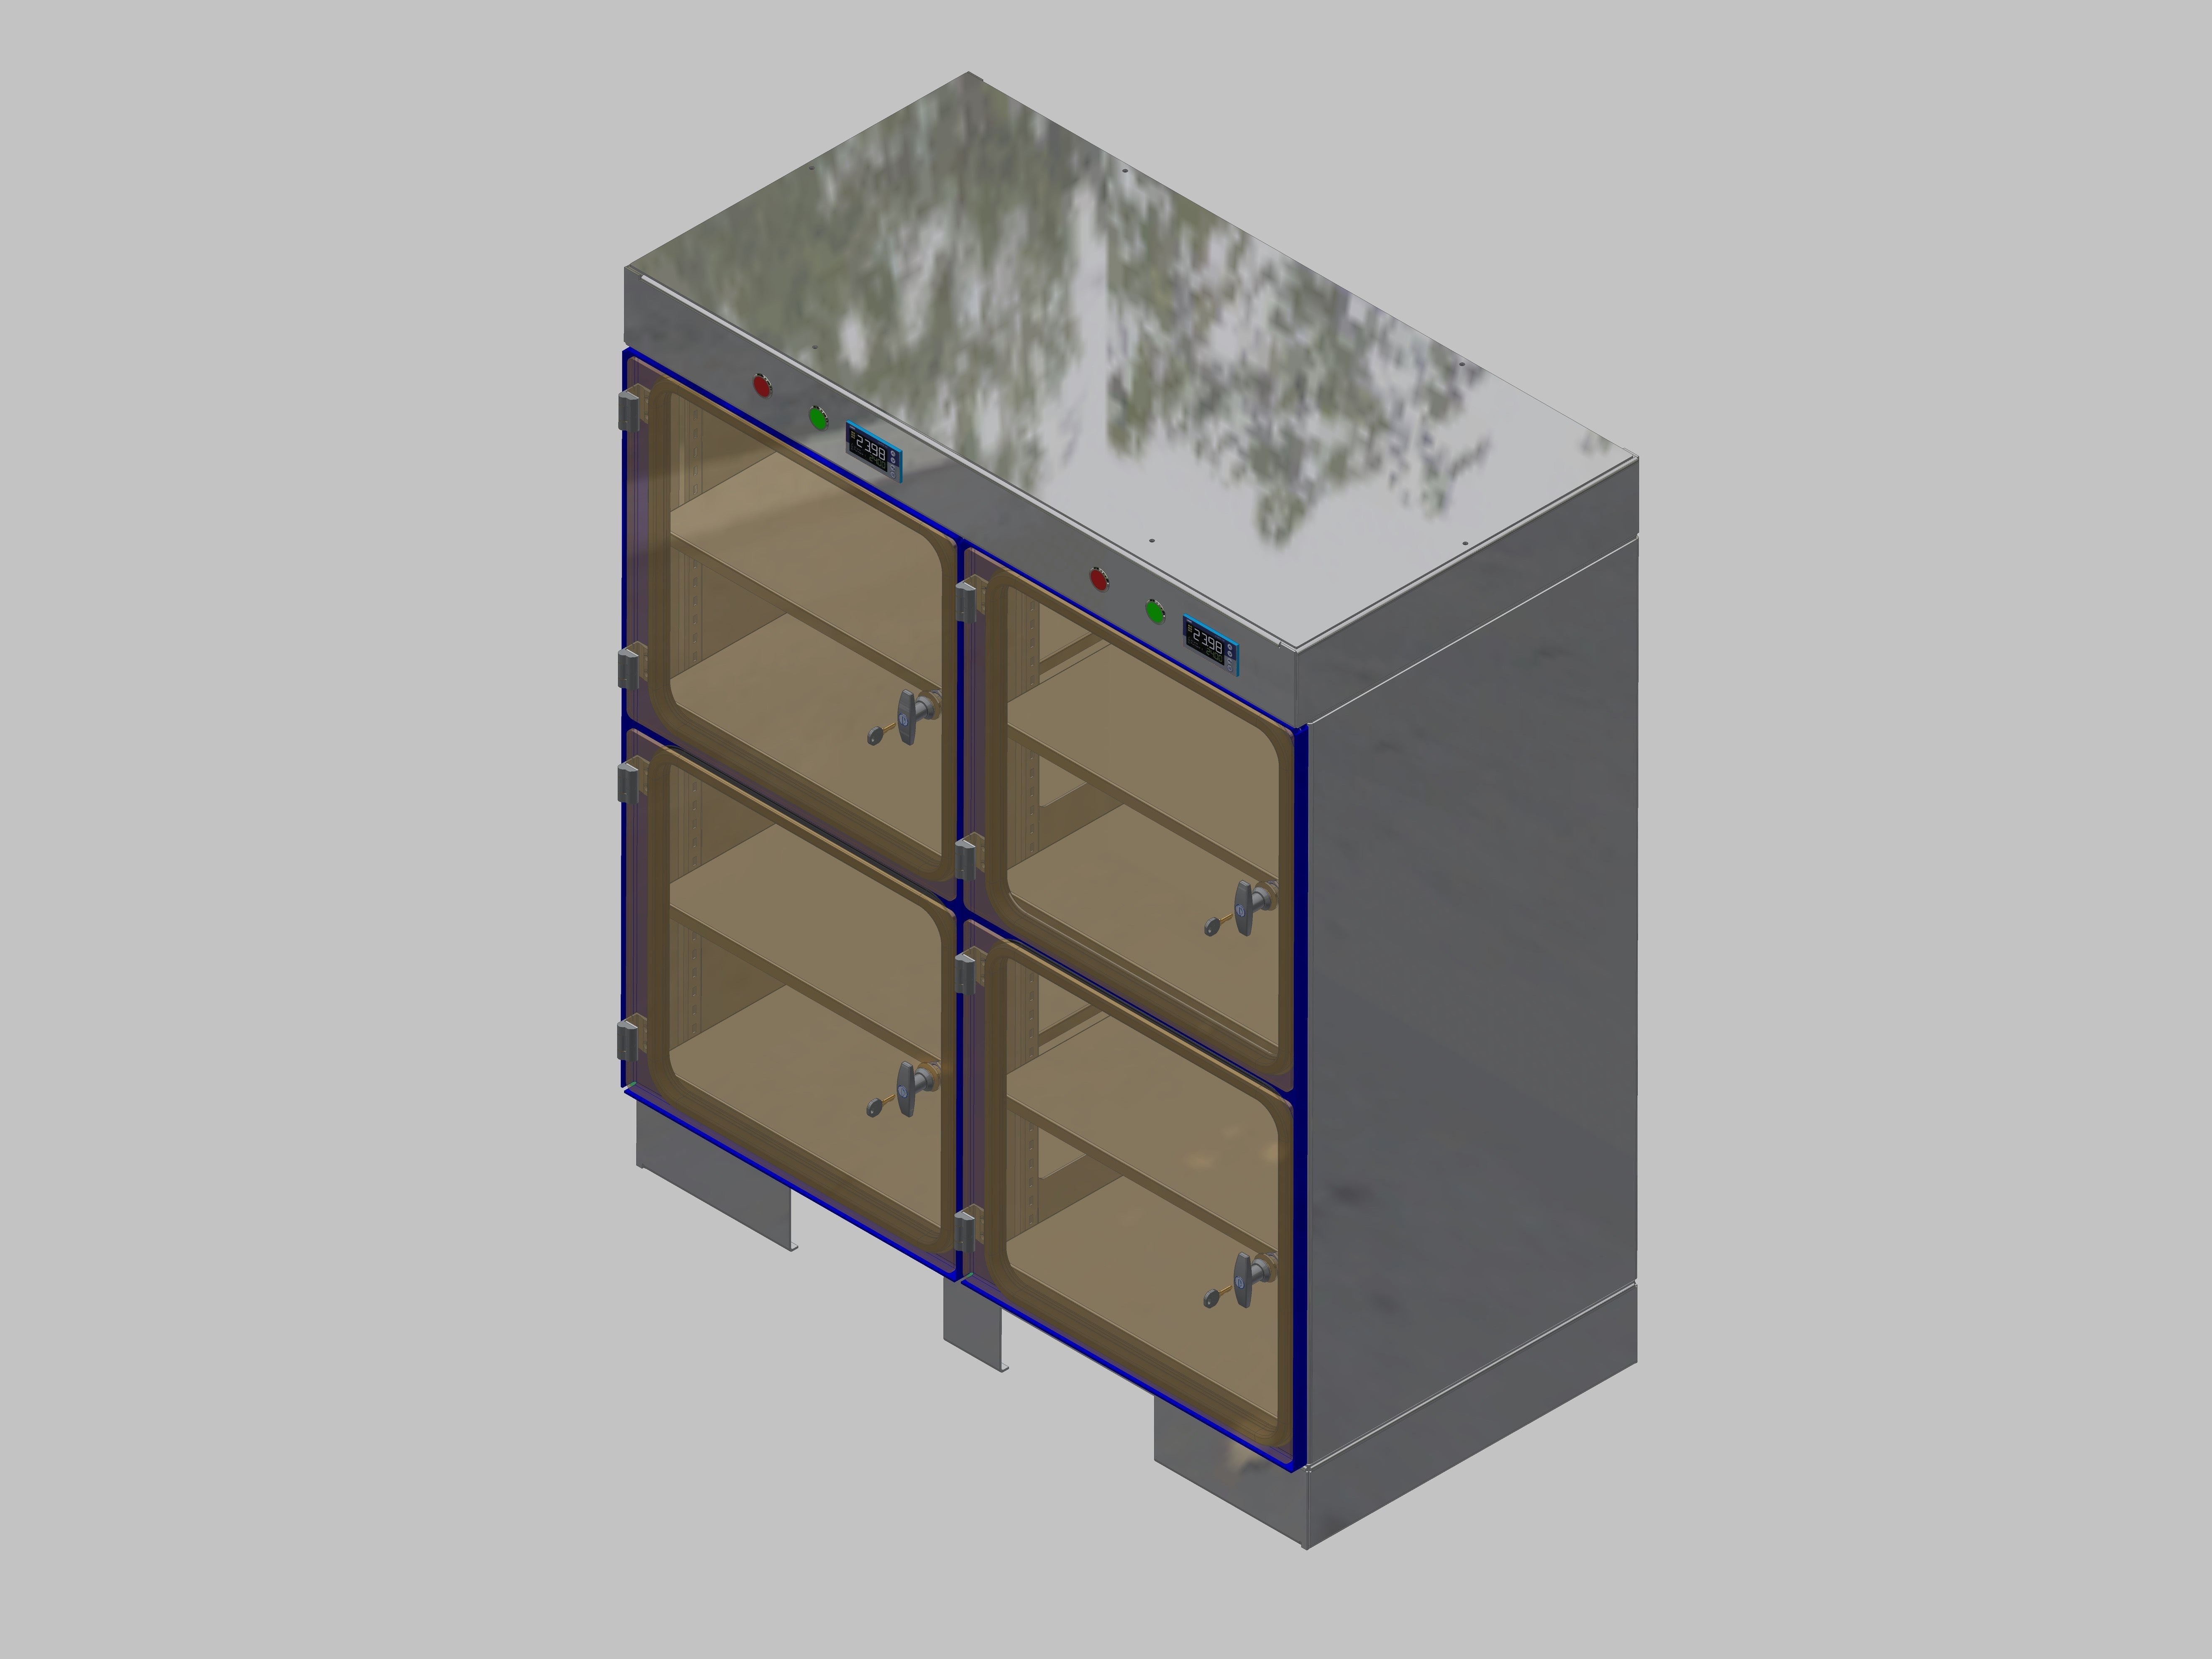 Dry storage cabinet-ITN-1200-4 with 2 shelves per compartment and base design that can be accessed with adjustable feet